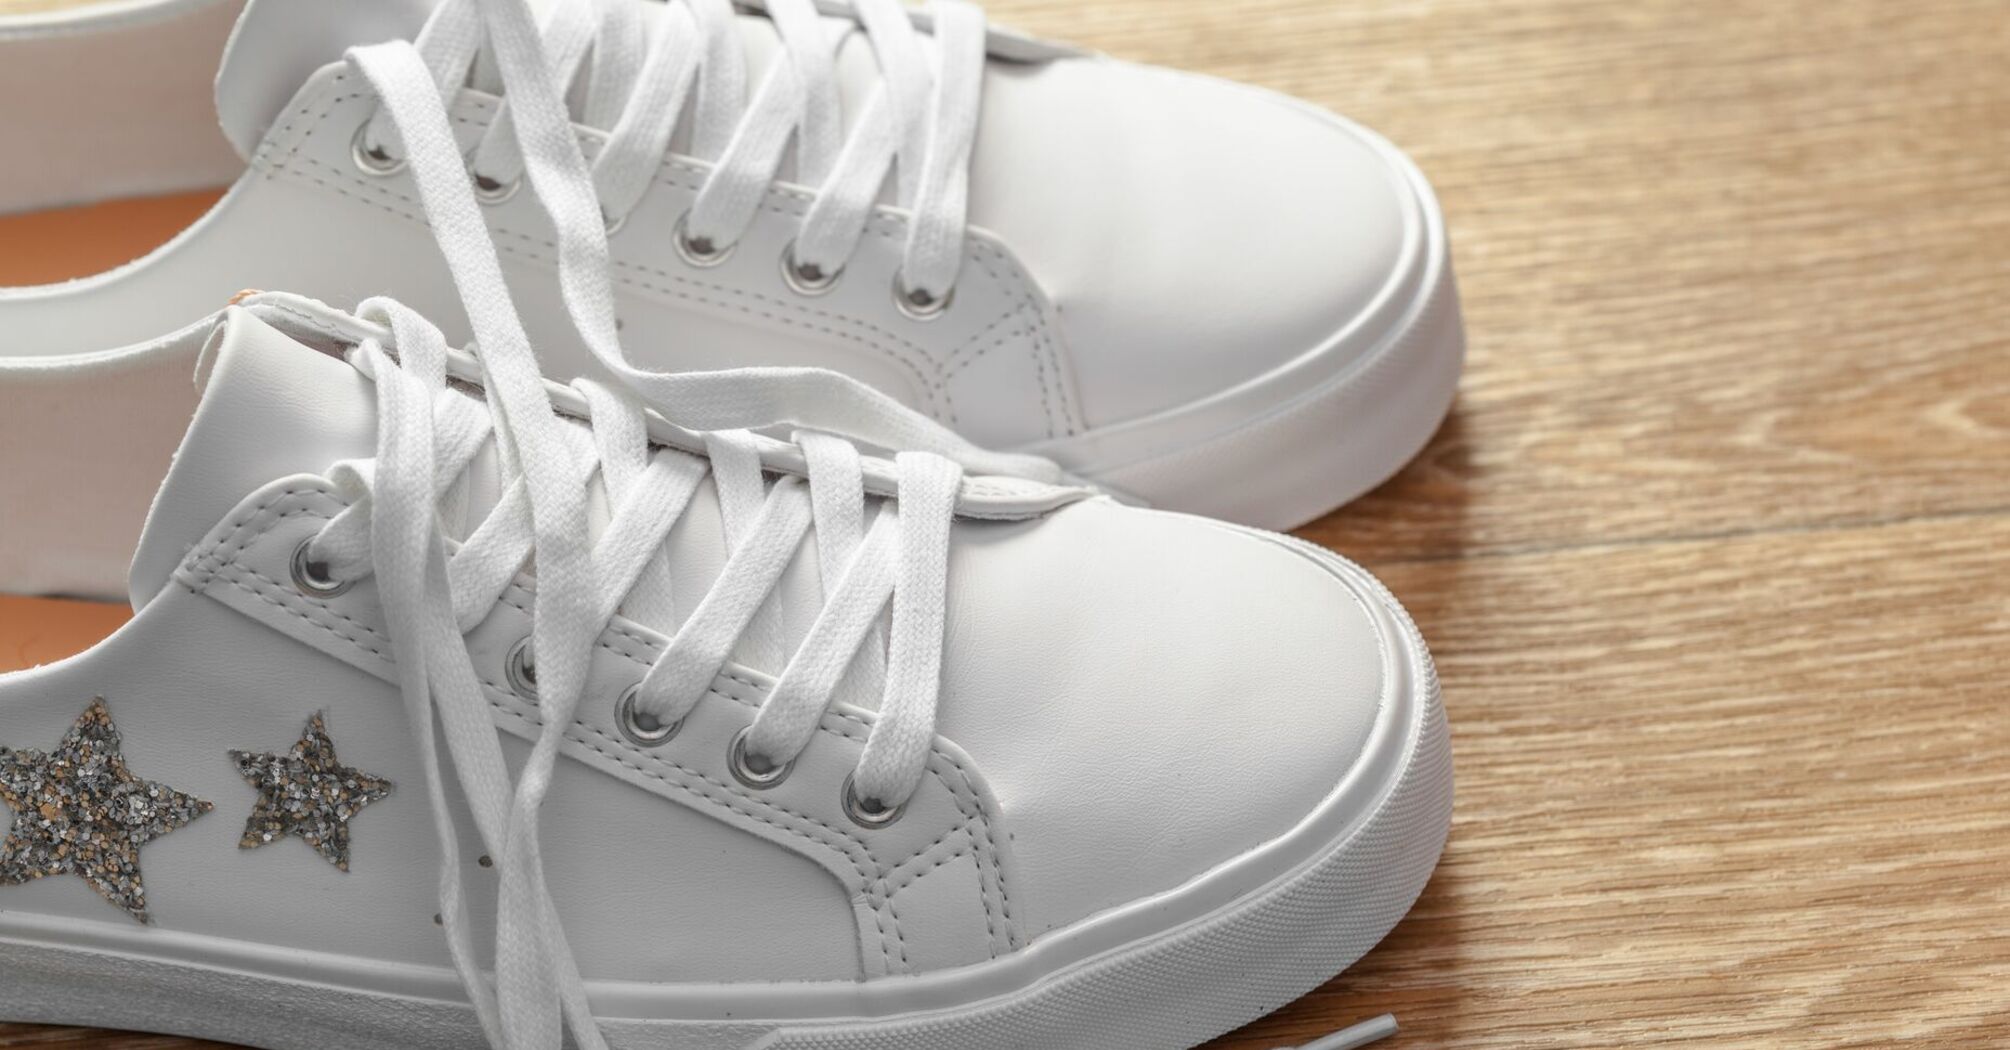 How to easily update white sneakers: Useful life hacks